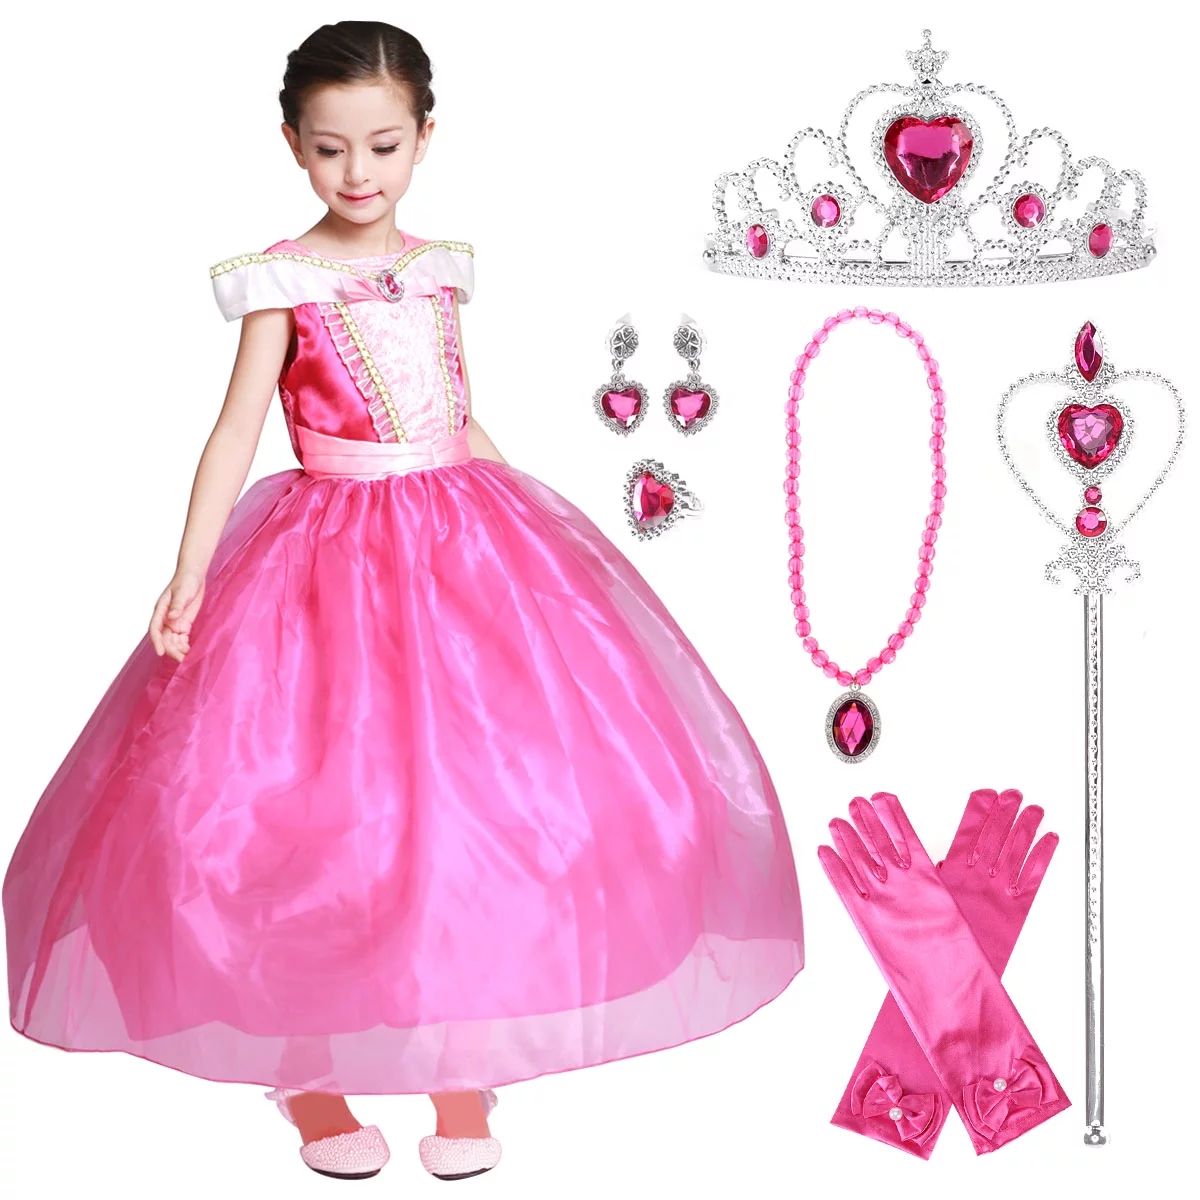 Sleeping Beauty Princess Costume Girls Birthday Party Dress Up With Accessories Age 3-12 Years - ... | Walmart (US)